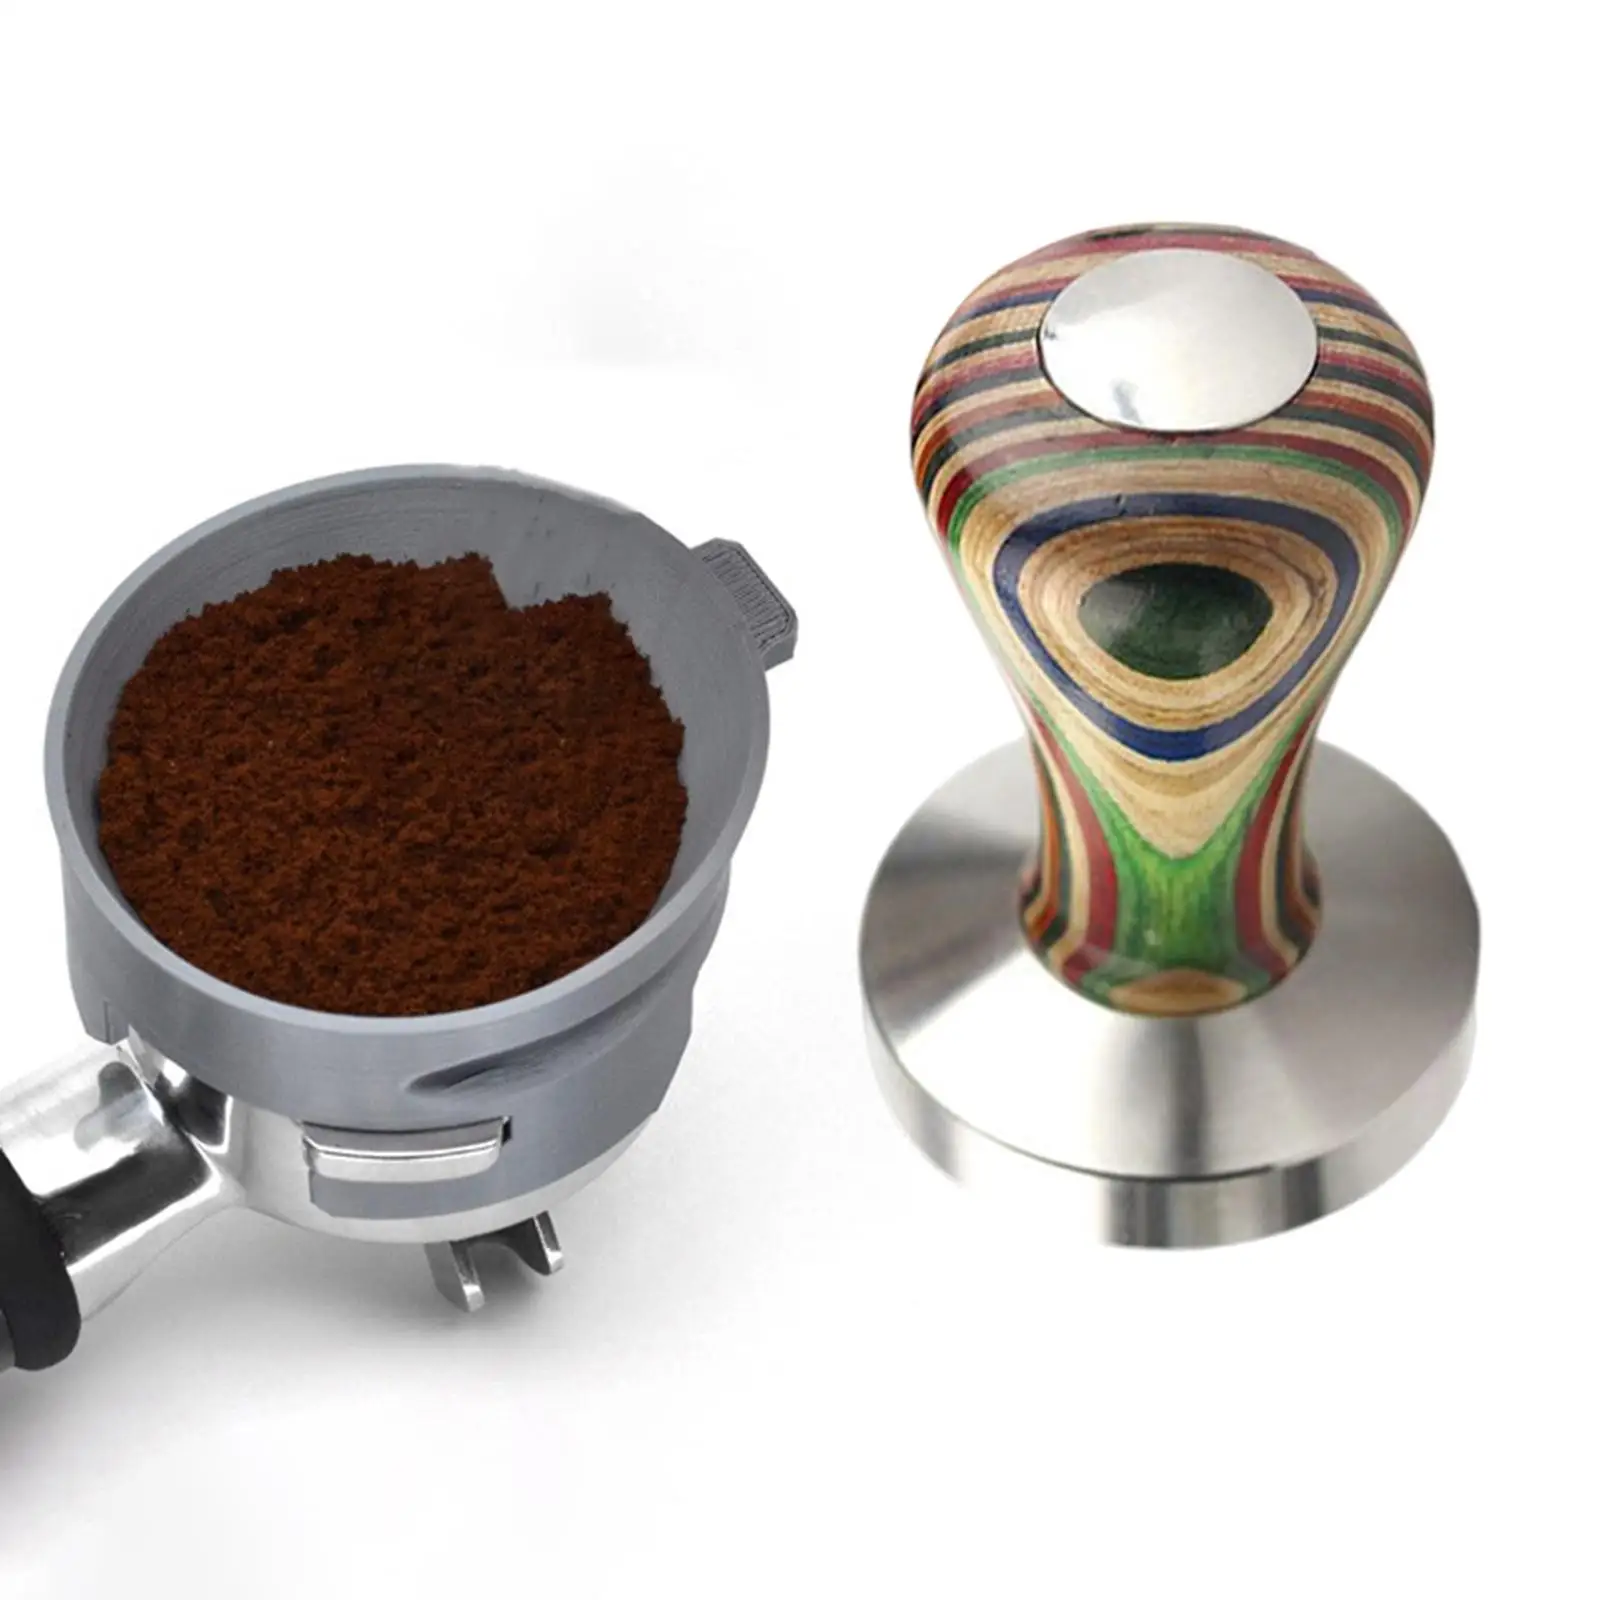 58mm Coffee Tamper Creative Colorful Wood Handle with Flat Base Coffee Bean Pressing Utensils Stainless Steel for Barista Gift